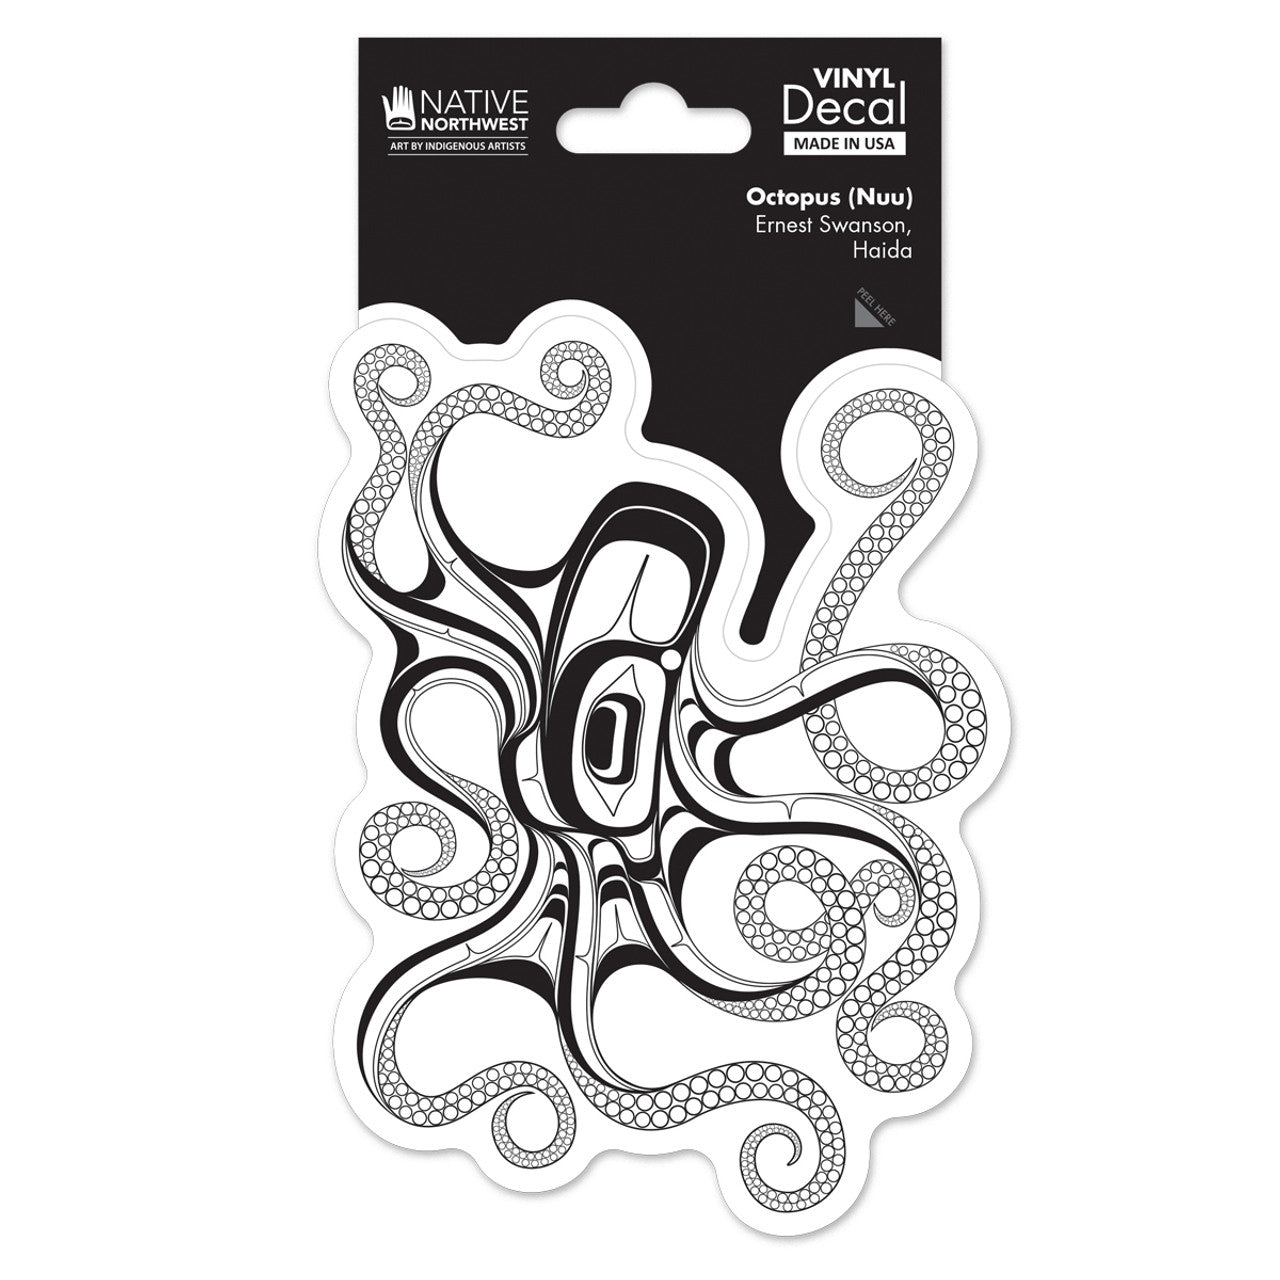 DECALS - Ernest Swanson Octopus - D238 - House of Himwitsa Native Art Gallery and Gifts